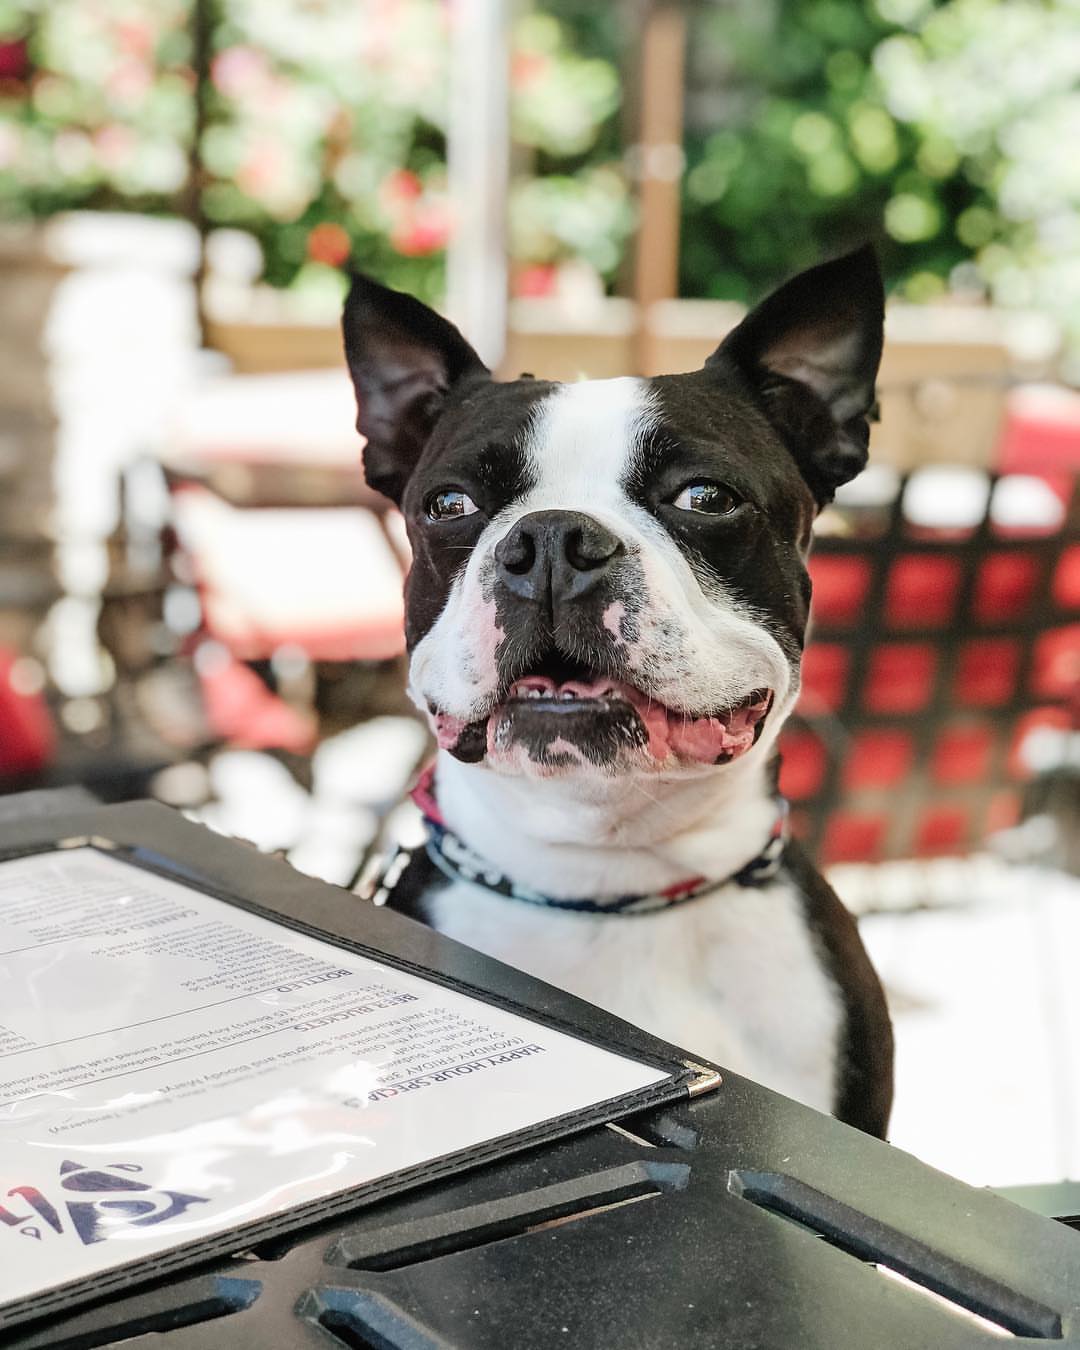 slice birmingham Dinner with the dogs: 15 spots with outdoor dining in Birmingham [CUTE DOG PHOTOS]